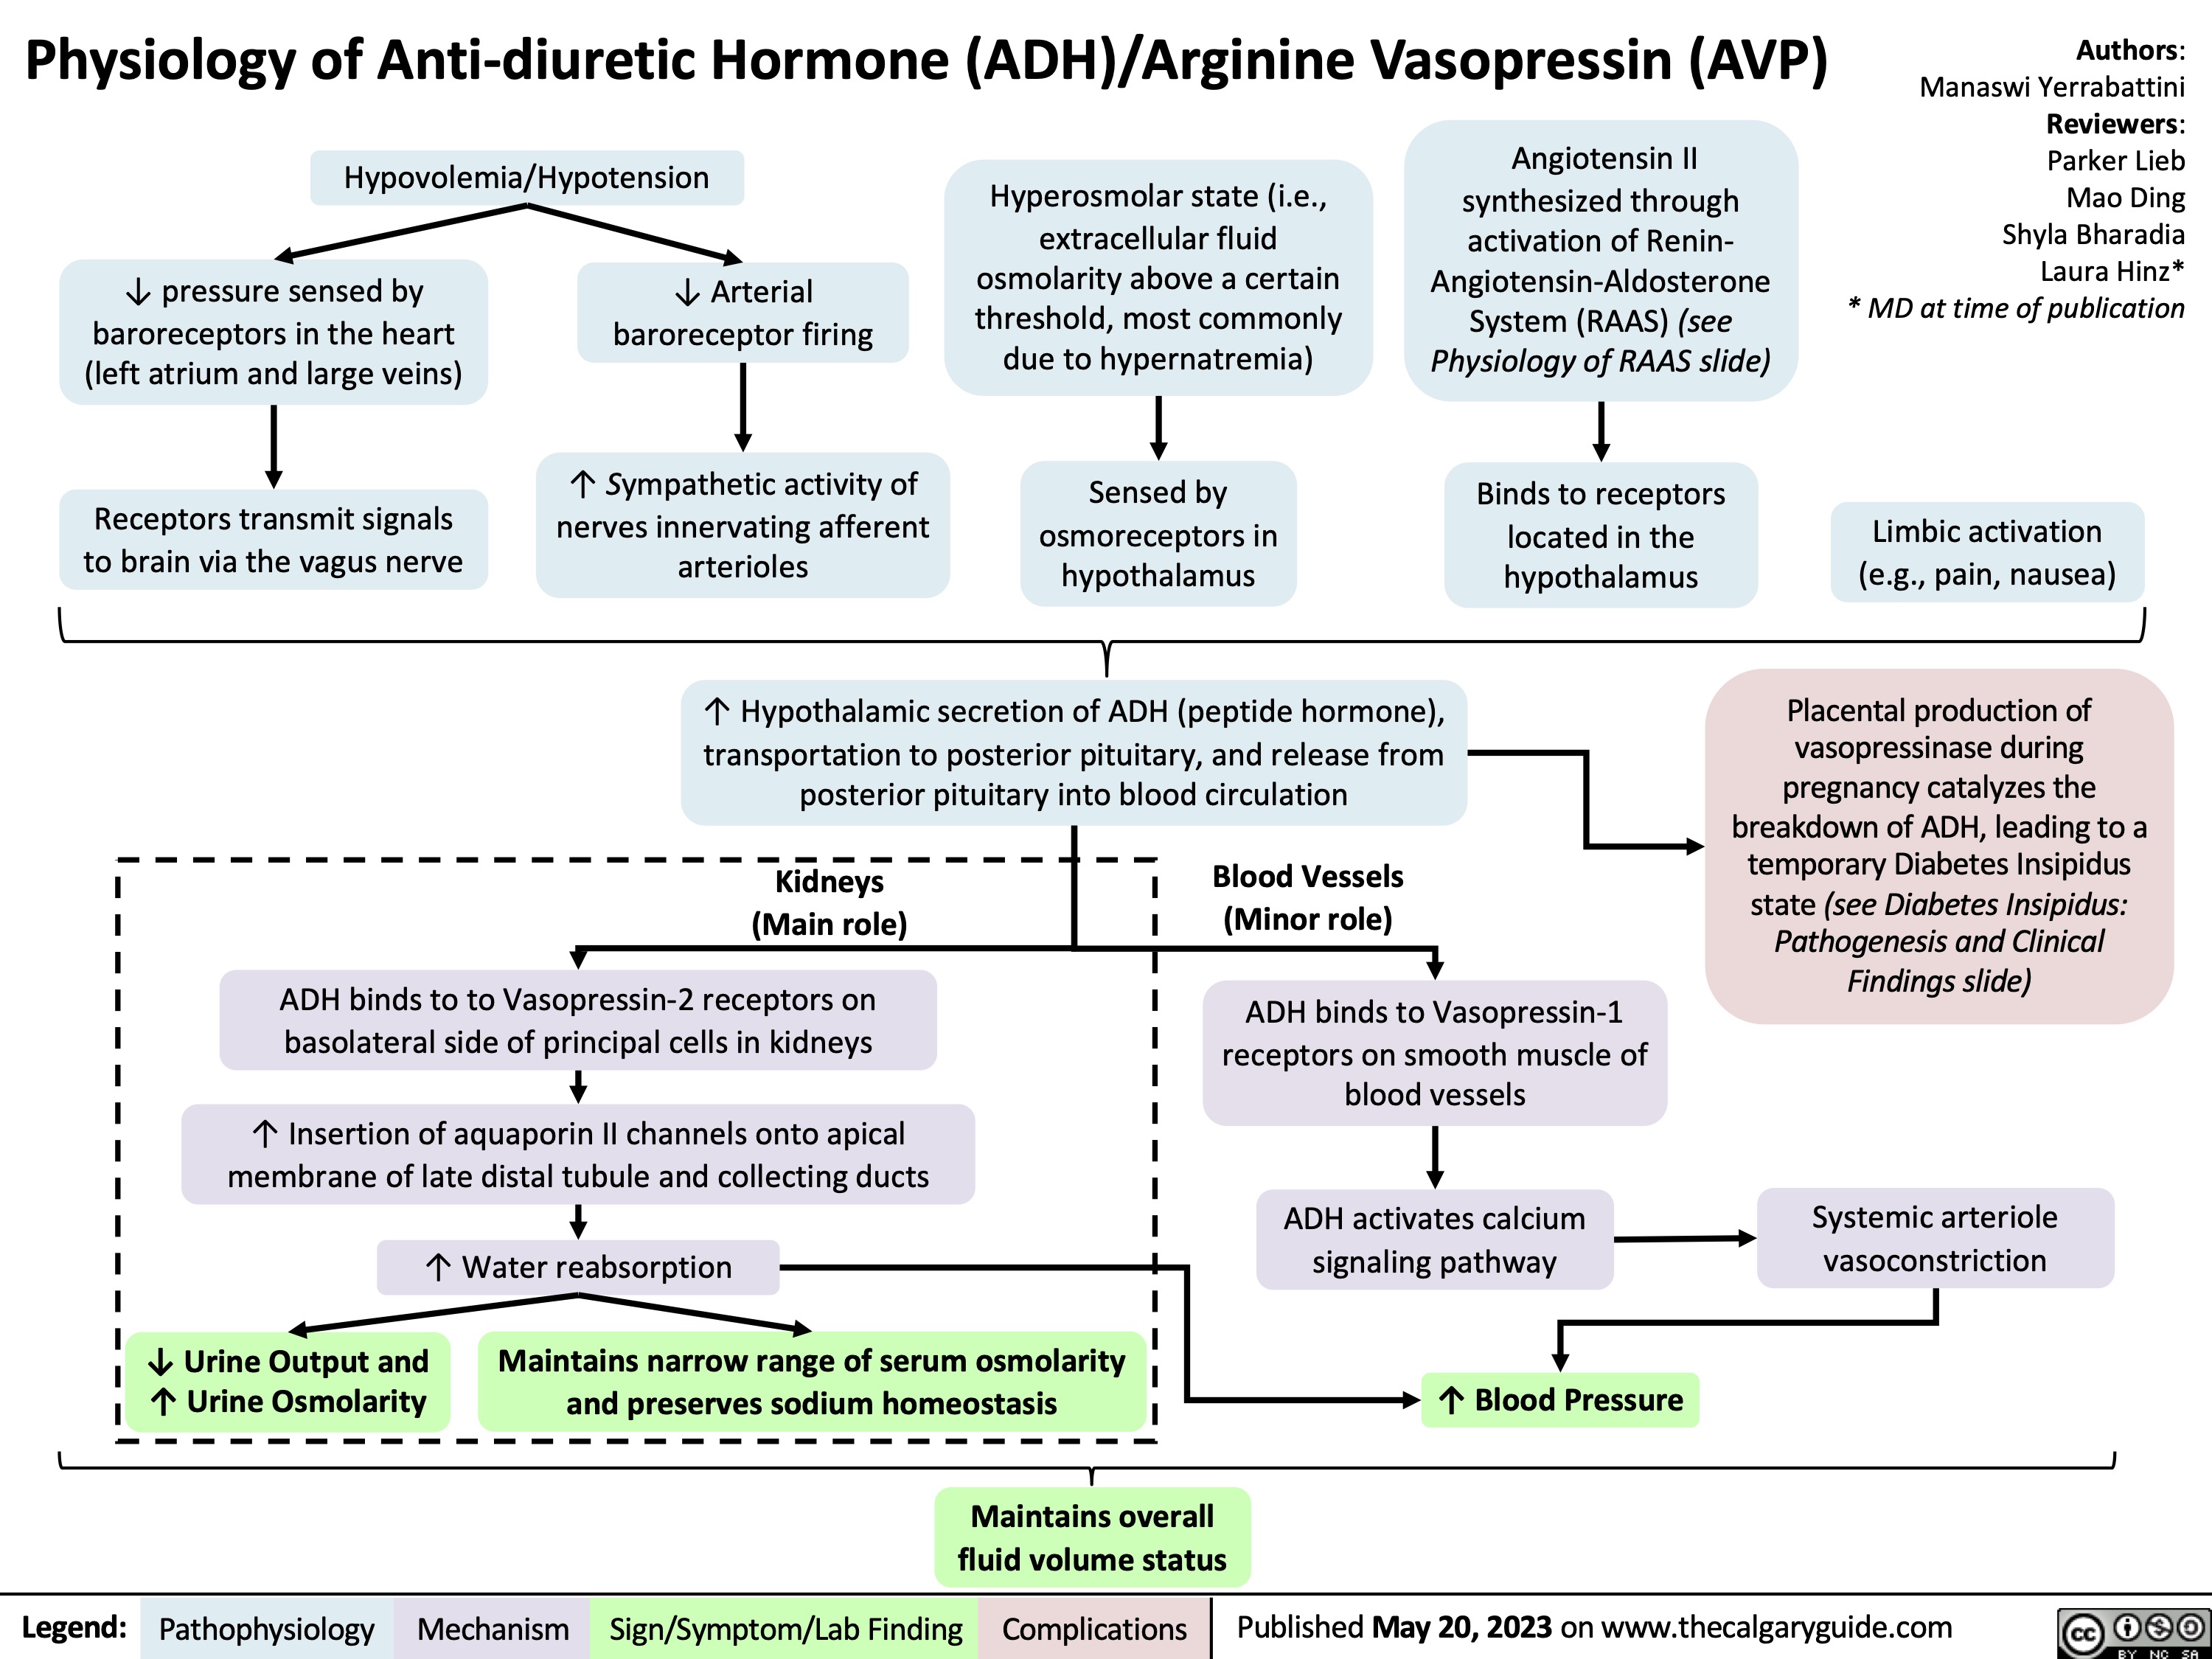 Physiology of Anti-diuretic Hormone (ADH)/Arginine Vasopressin (AVP)
Authors: Manaswi Yerrabattini Reviewers: Parker Lieb Mao Ding Shyla Bharadia Laura Hinz* * MD at time of publication
Limbic activation (e.g., pain, nausea)
Placental production of vasopressinase during pregnancy catalyzes the breakdown of ADH, leading to a temporary Diabetes Insipidus state (see Diabetes Insipidus: Pathogenesis and Clinical Findings slide)
Systemic arteriole vasoconstriction
  Hypovolemia/Hypotension
Hyperosmolar state (i.e., extracellular fluid osmolarity above a certain threshold, most commonly due to hypernatremia)
Sensed by osmoreceptors in hypothalamus
Angiotensin II synthesized through activation of Renin- Angiotensin-Aldosterone System (RAAS) (see Physiology of RAAS slide)
Binds to receptors located in the hypothalamus
    ↓ pressure sensed by baroreceptors in the heart (left atrium and large veins)
Receptors transmit signals to brain via the vagus nerve
↓ Arterial baroreceptor firing
↑ Sympathetic activity of nerves innervating afferent arterioles
          ↑ Hypothalamic secretion of ADH (peptide hormone), transportation to posterior pituitary, and release from posterior pituitary into blood circulation
Blood Vessels (Minor role)
    Kidneys (Main role)
ADH binds to to Vasopressin-2 receptors on basolateral side of principal cells in kidneys
↑ Insertion of aquaporin II channels onto apical membrane of late distal tubule and collecting ducts
↑ Water reabsorption
↓ Urine Output and Maintains narrow range of serum osmolarity ↑ Urine Osmolarity and preserves sodium homeostasis
  ADH binds to Vasopressin-1 receptors on smooth muscle of blood vessels
   ADH activates calcium signaling pathway
↑ Blood Pressure
           Maintains overall fluid volume status
 Legend:
 Pathophysiology
 Mechanism
Sign/Symptom/Lab Finding
 Complications
Published May 20, 2023 on www.thecalgaryguide.com
   